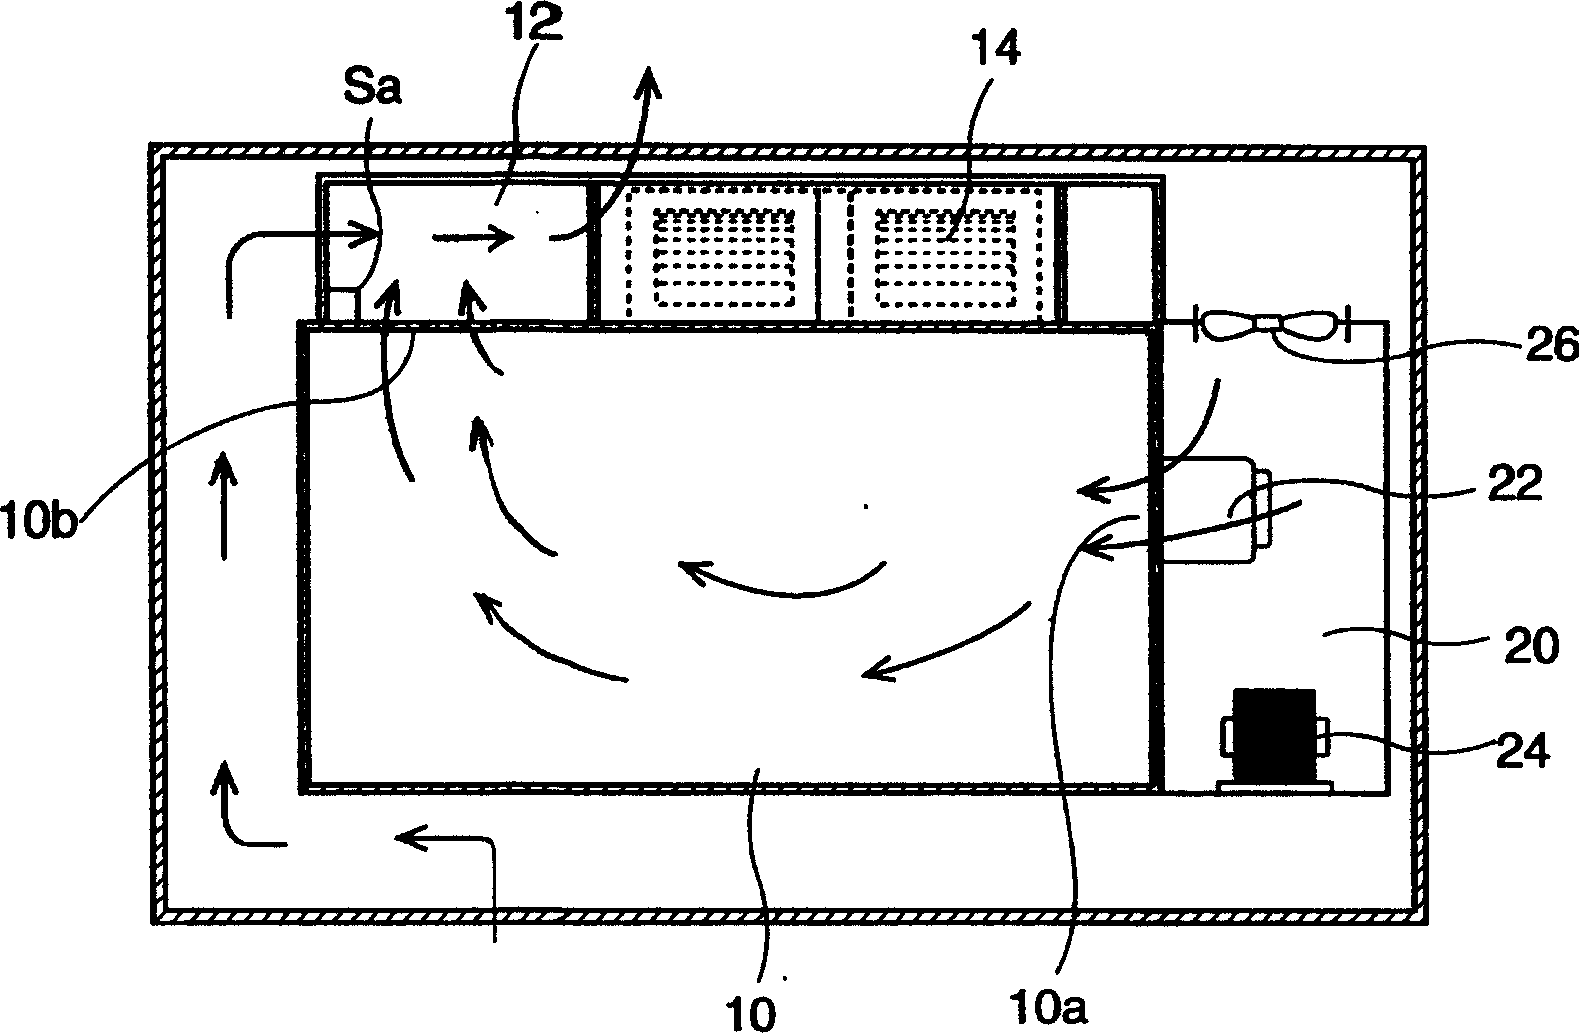 Humidity sensing arrangement for microwave oven with vented fume hood